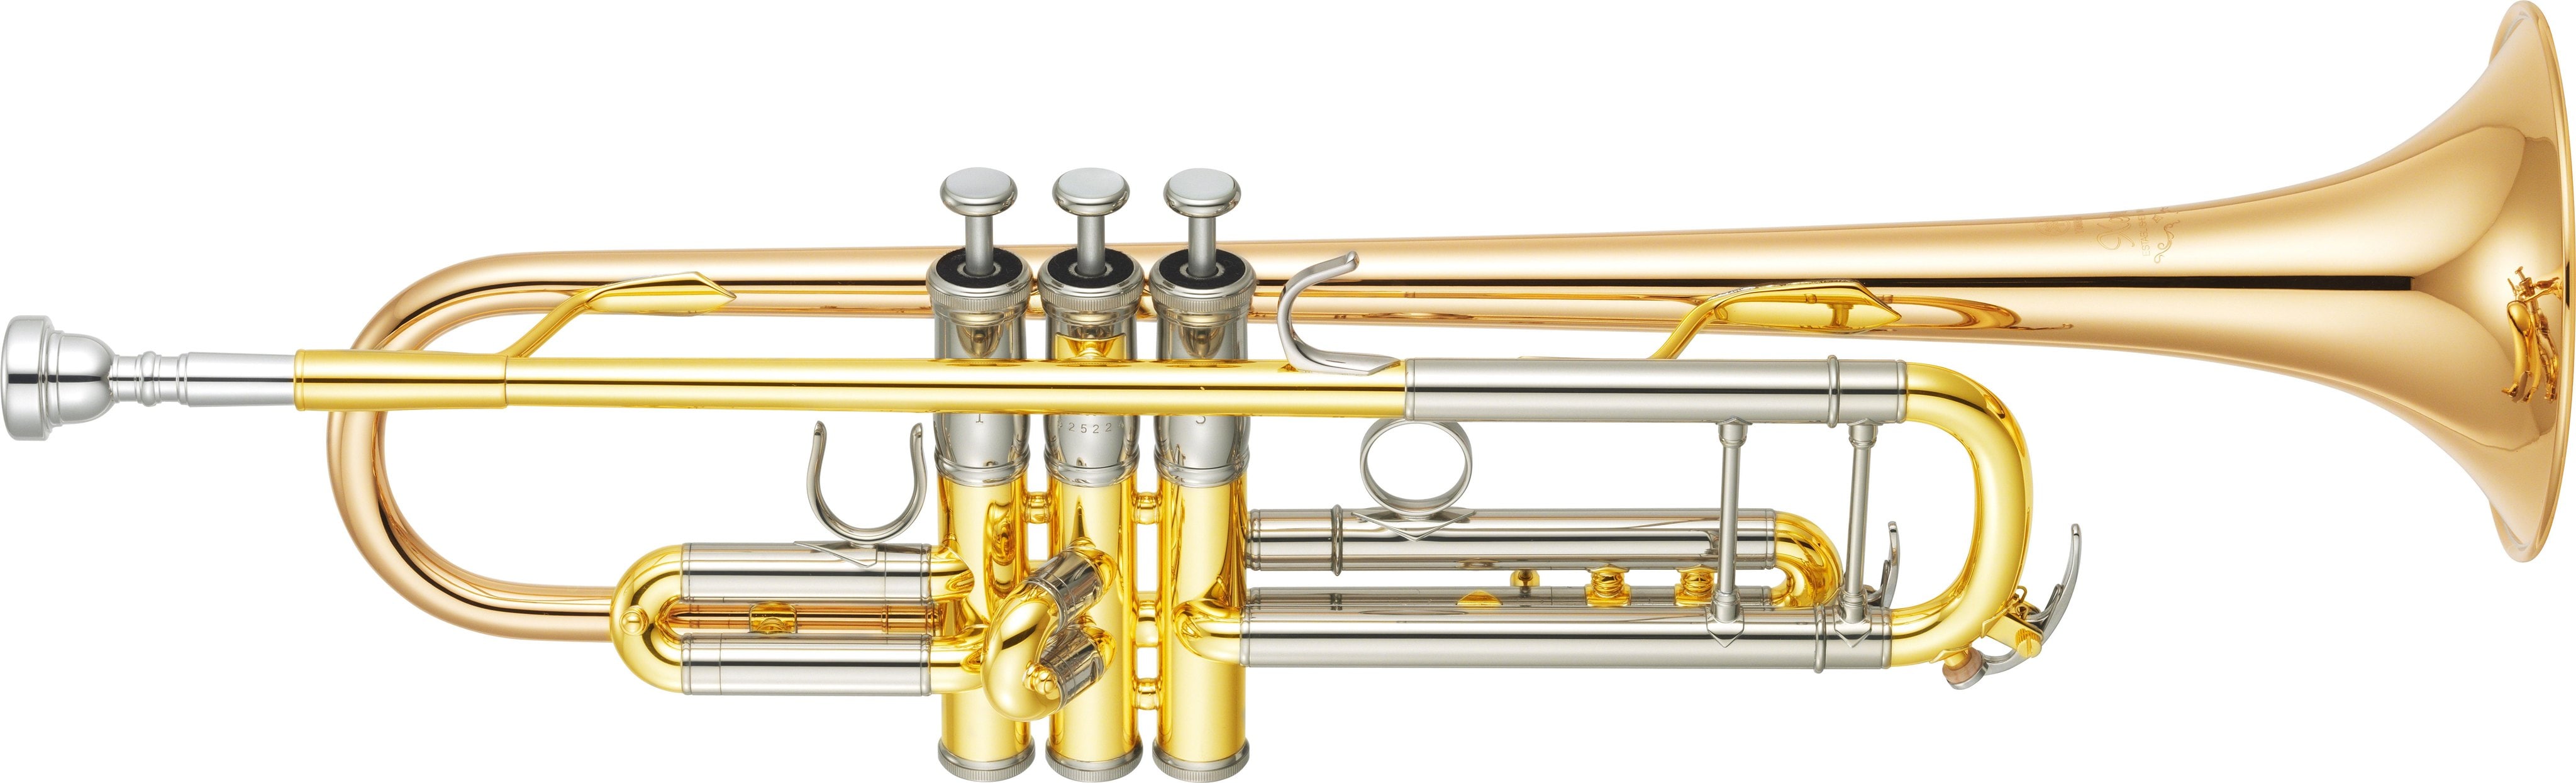 YTR-8335II - Overview - Bb Trumpets - Trumpets - Brass & Woodwinds 